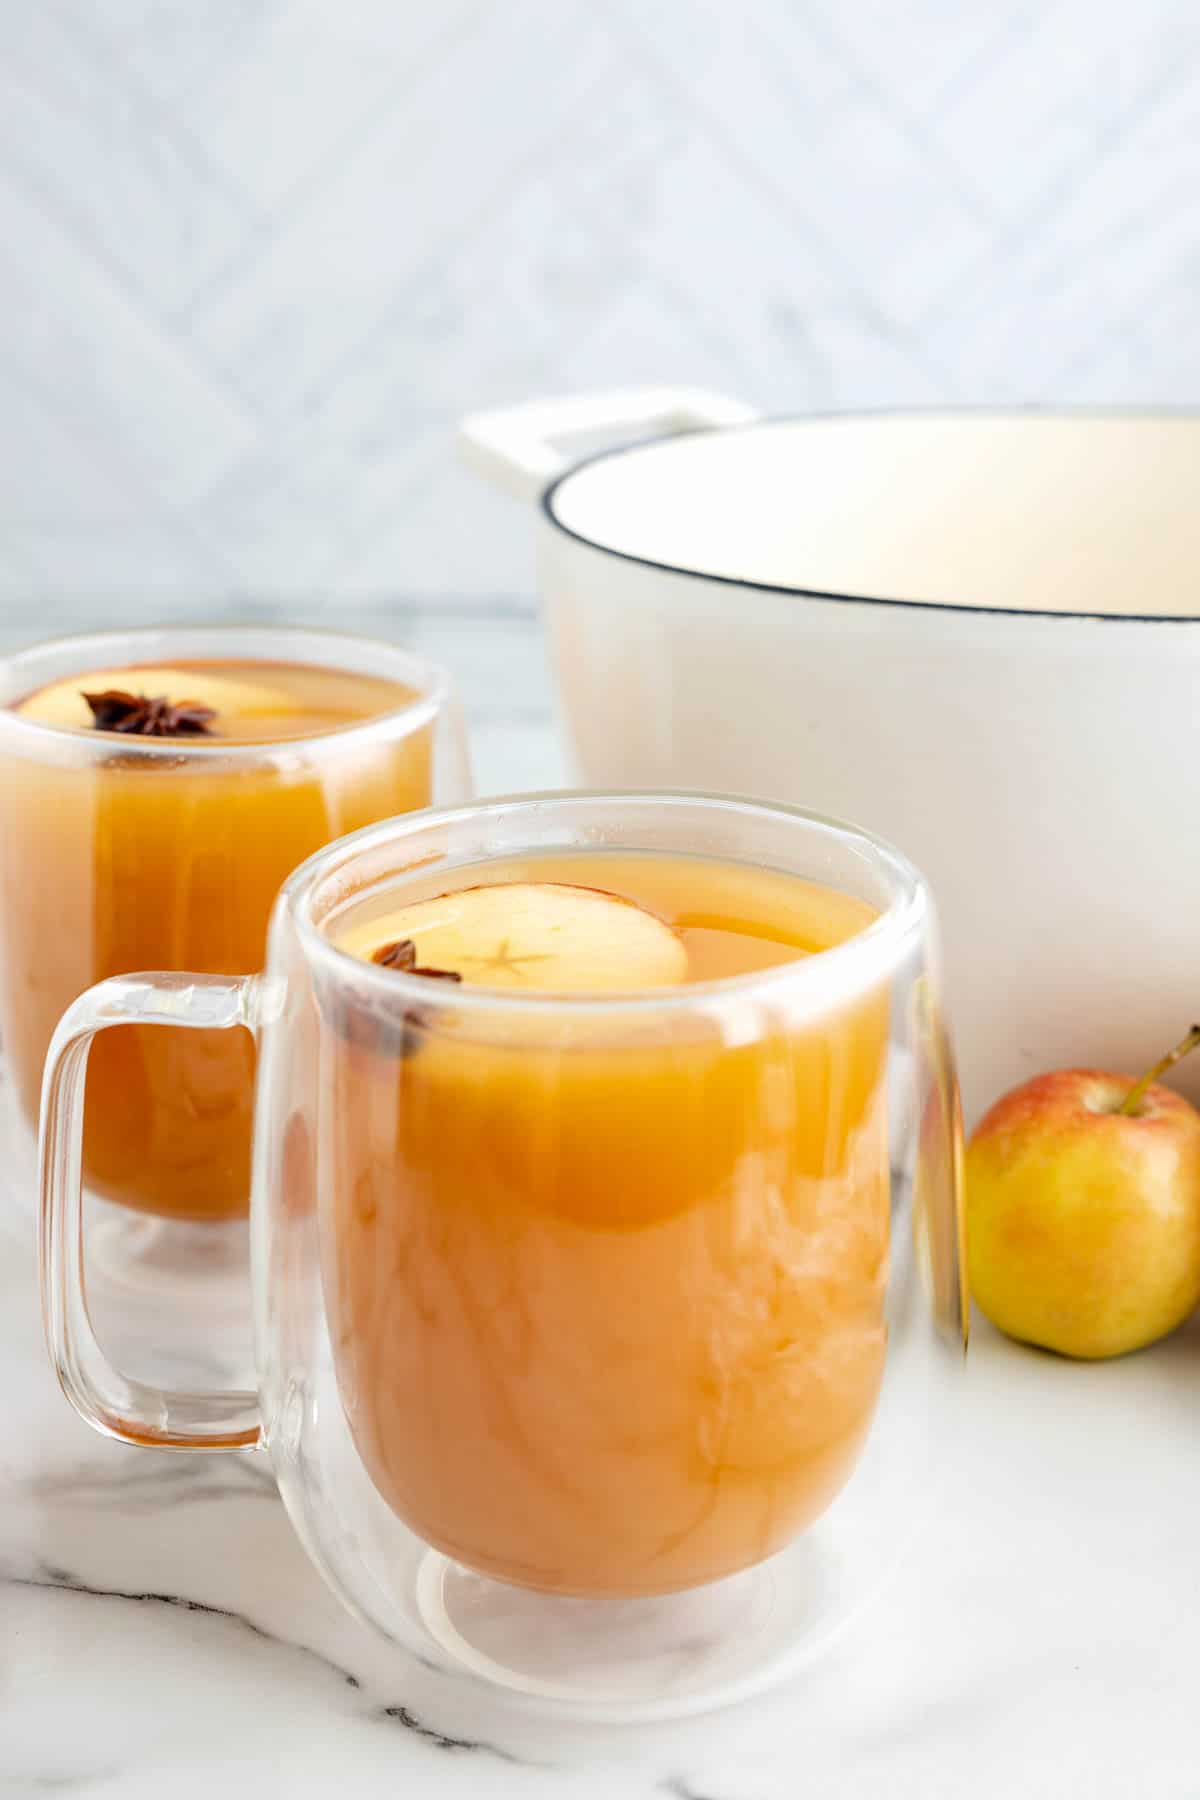 Glasses of wassail in front of a white pot.